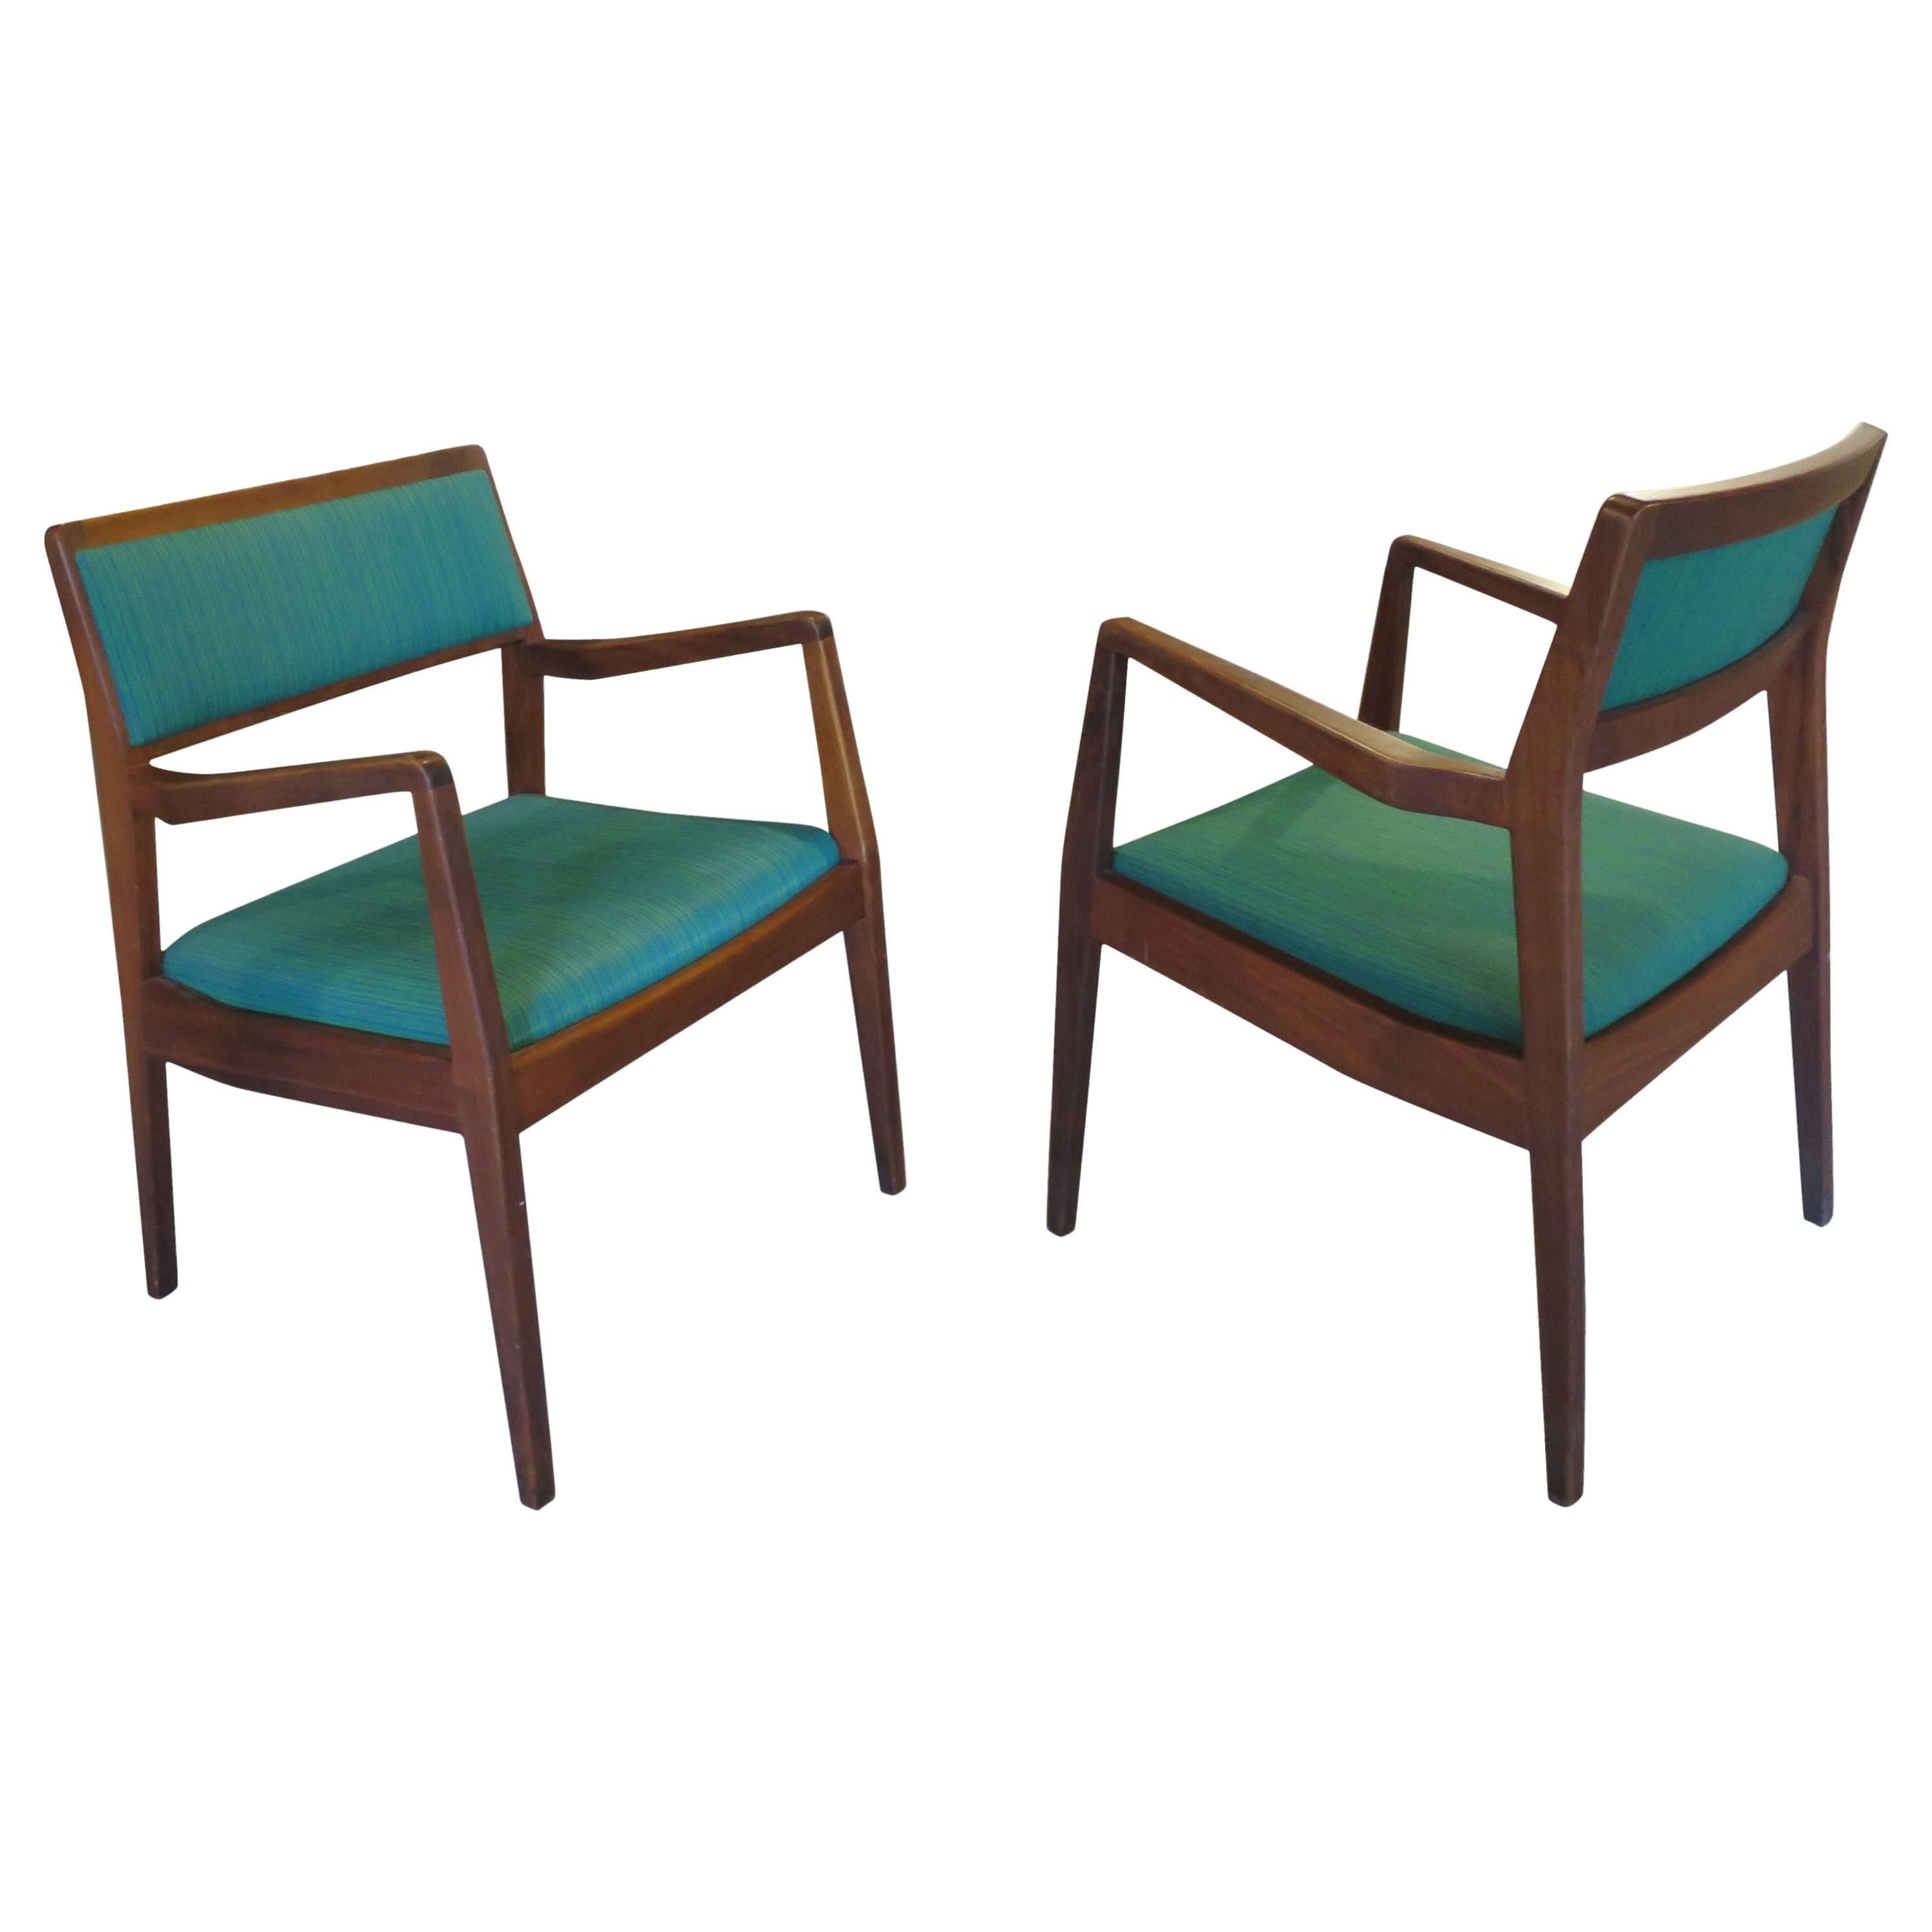 Pair of Jens Risom "Playboy" Armchairs